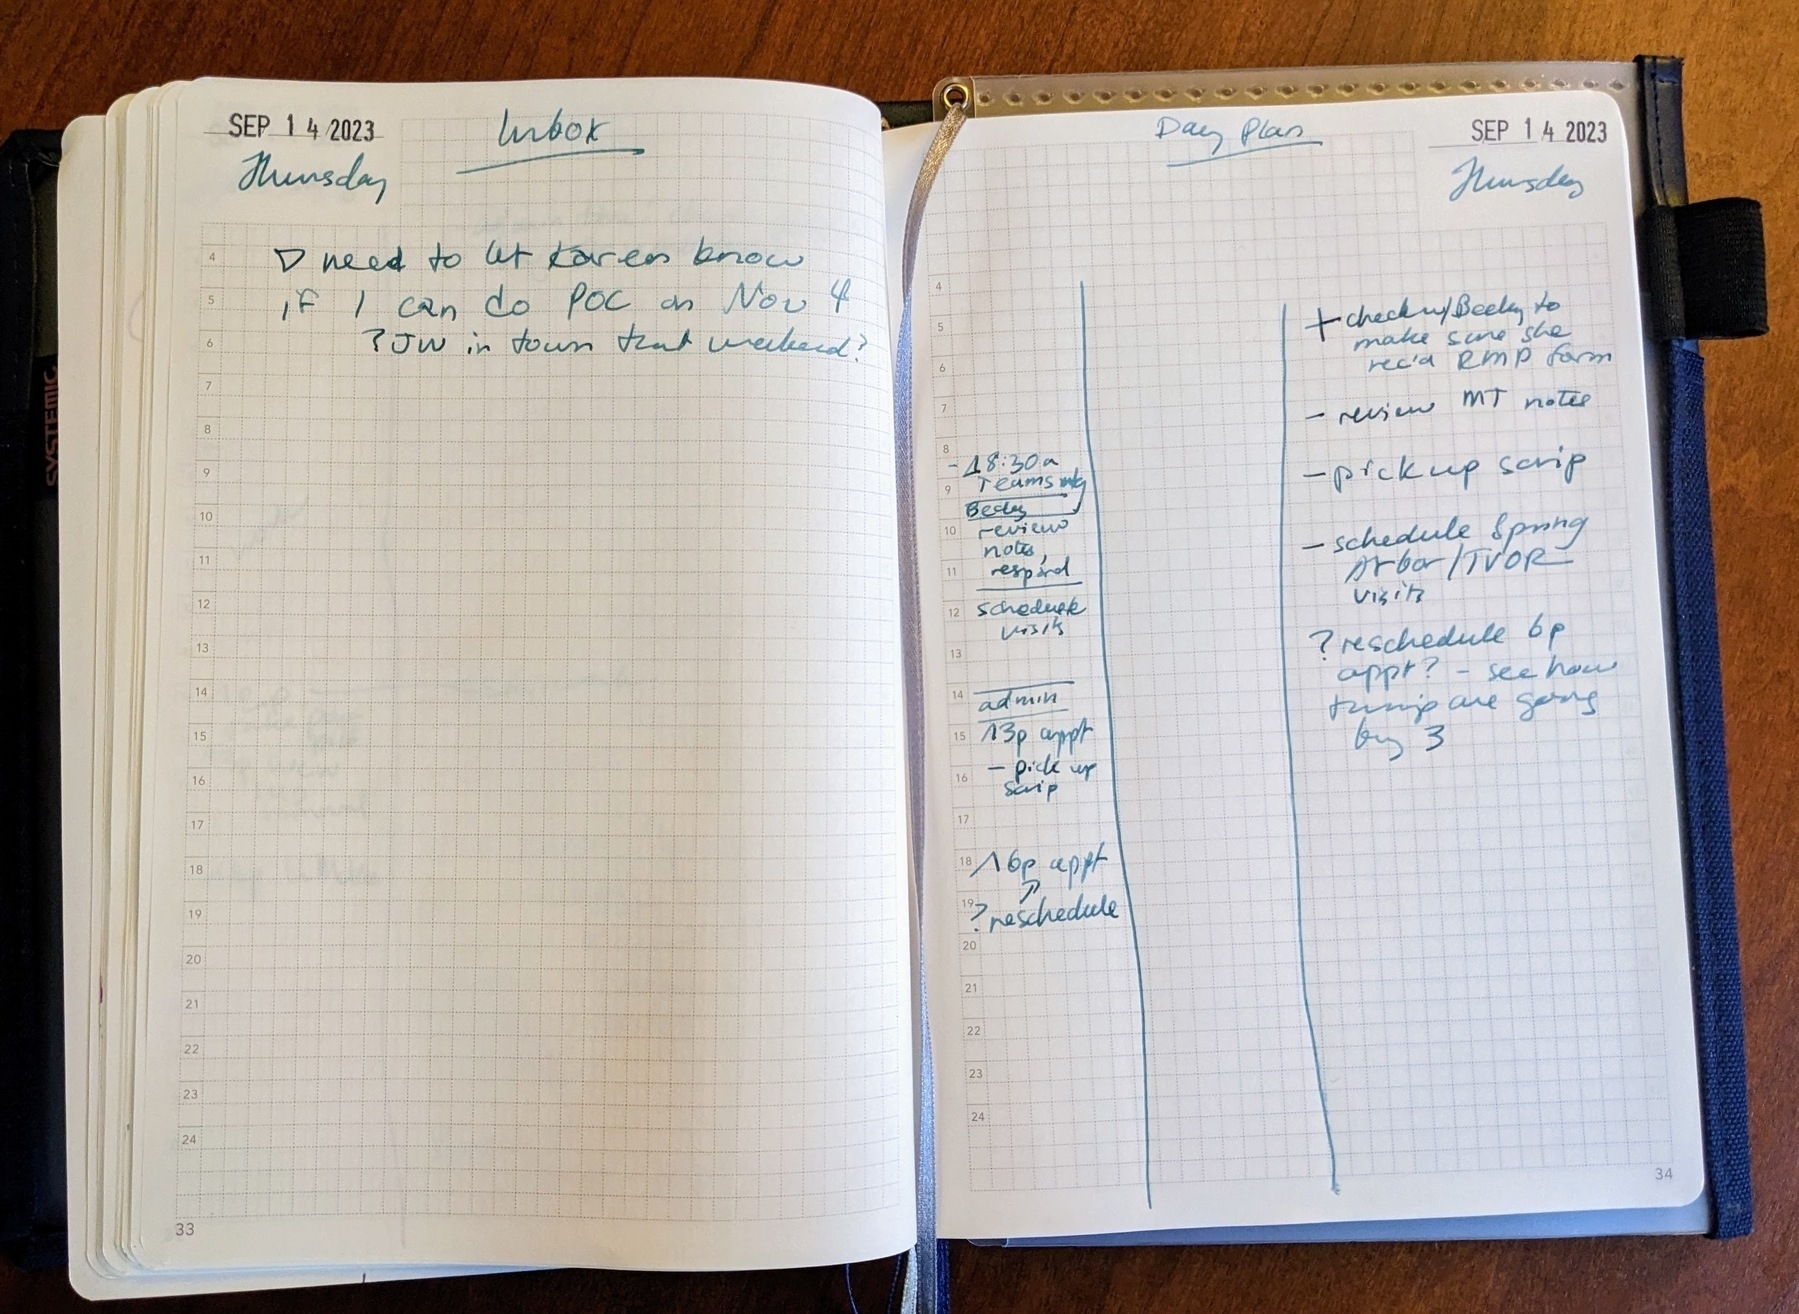 two page spread with inbox on the left page and a day plan with a timeline and task list on the right page